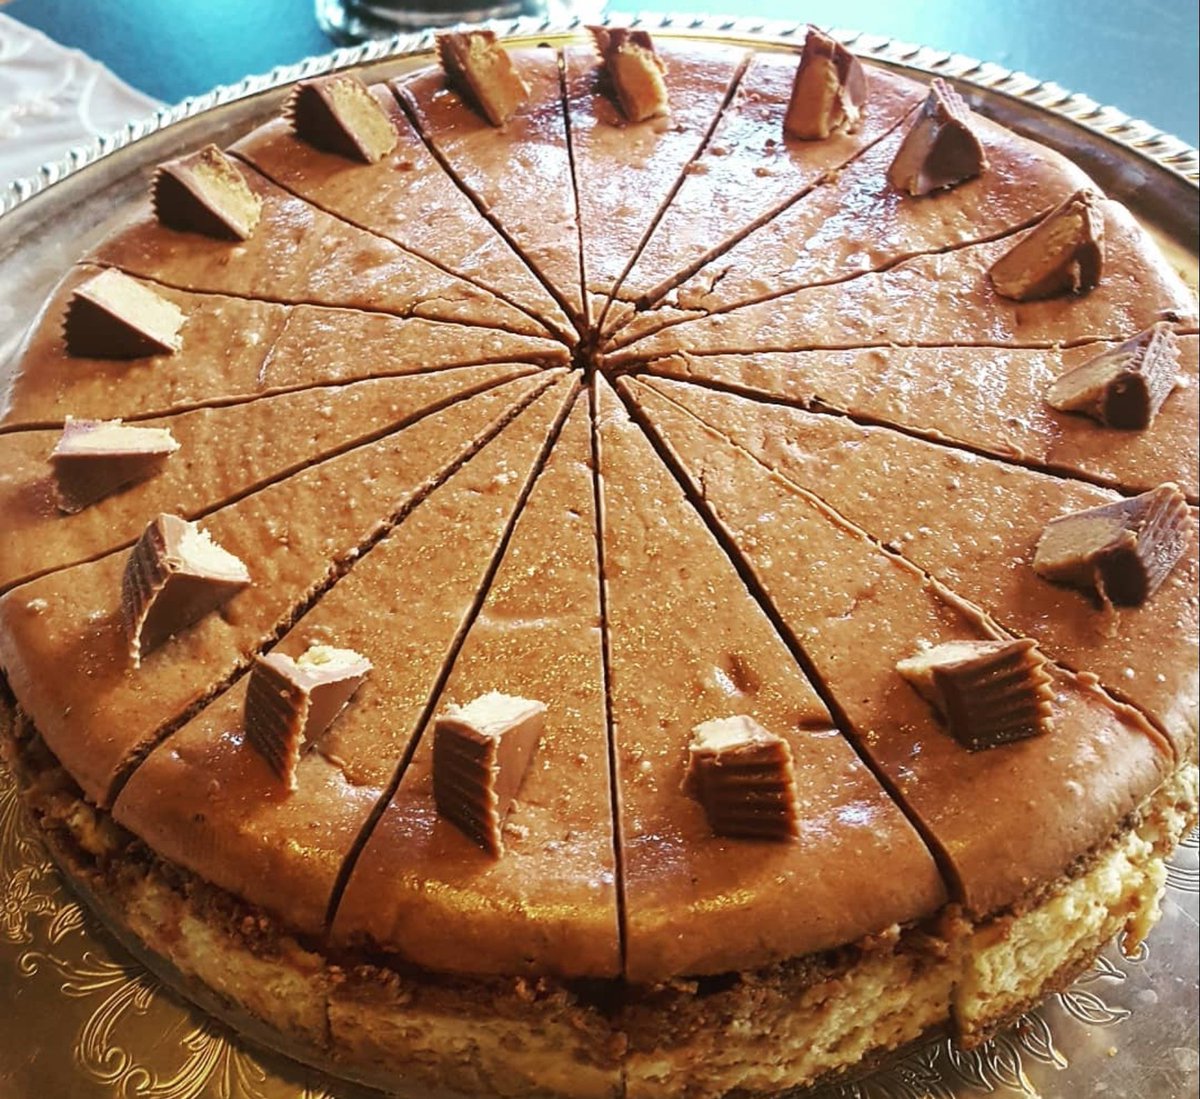 We are accepting leftover Halloween candy of the following kinds, in exchange for a slice of cheesecake: Reeses Nestle Crunch Bar Take 5 Milky Way Butterﬁnger Heath Snicker Bar Twix Drop off anytime we're open thru November 10th! MuddyPawsCheesecake.com #Halloween